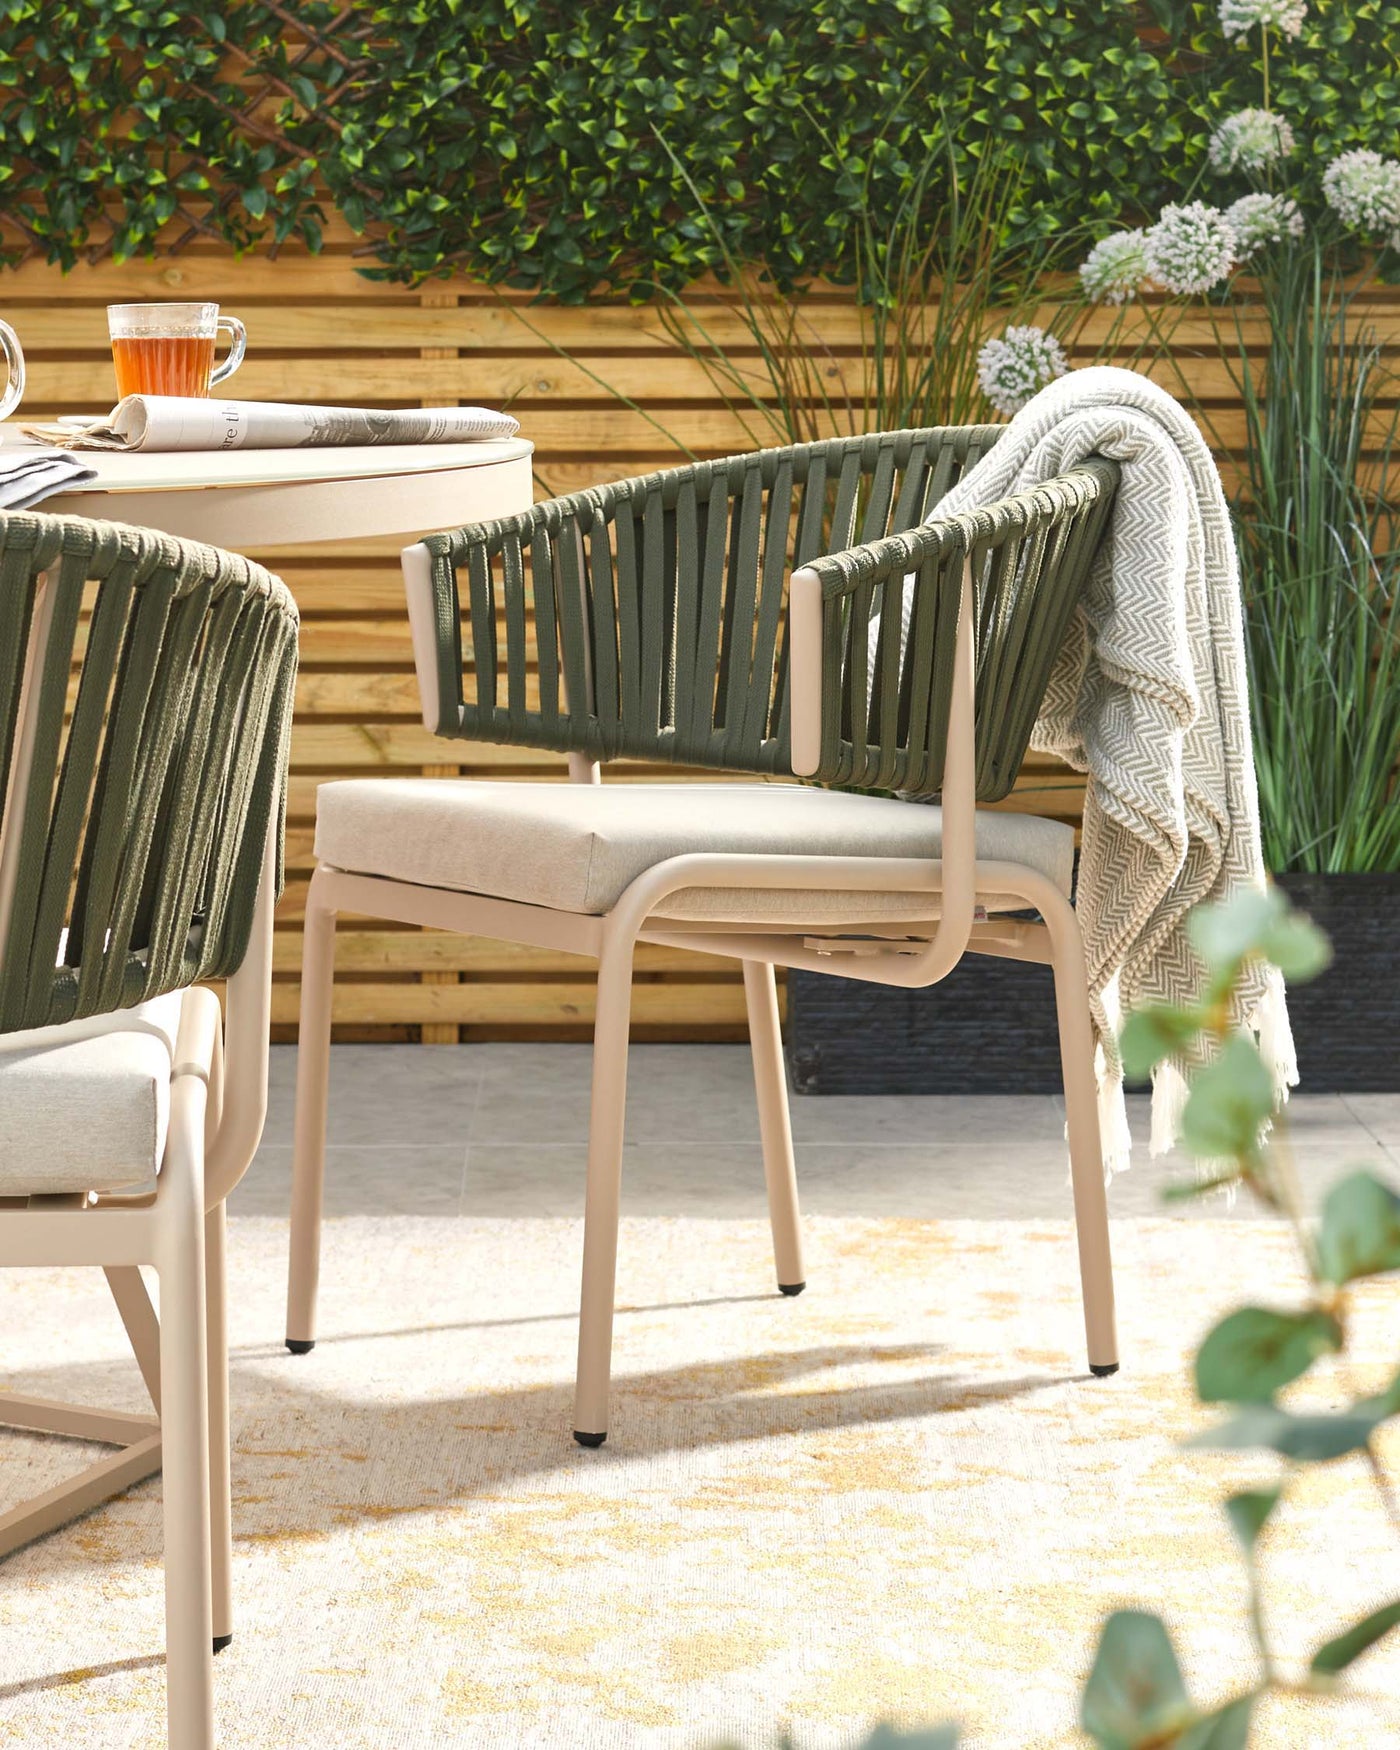 Modern outdoor furniture set featuring a beige metal frame chair with olive green rope backrest and armrests, complemented by a light beige seat cushion. A throw blanket is casually draped over one chair, signalling comfort. The round side table with a similar beige frame holds a glass cup and reading materials, creating a relaxing ambiance on a sunlit patio surrounded by lush greenery.